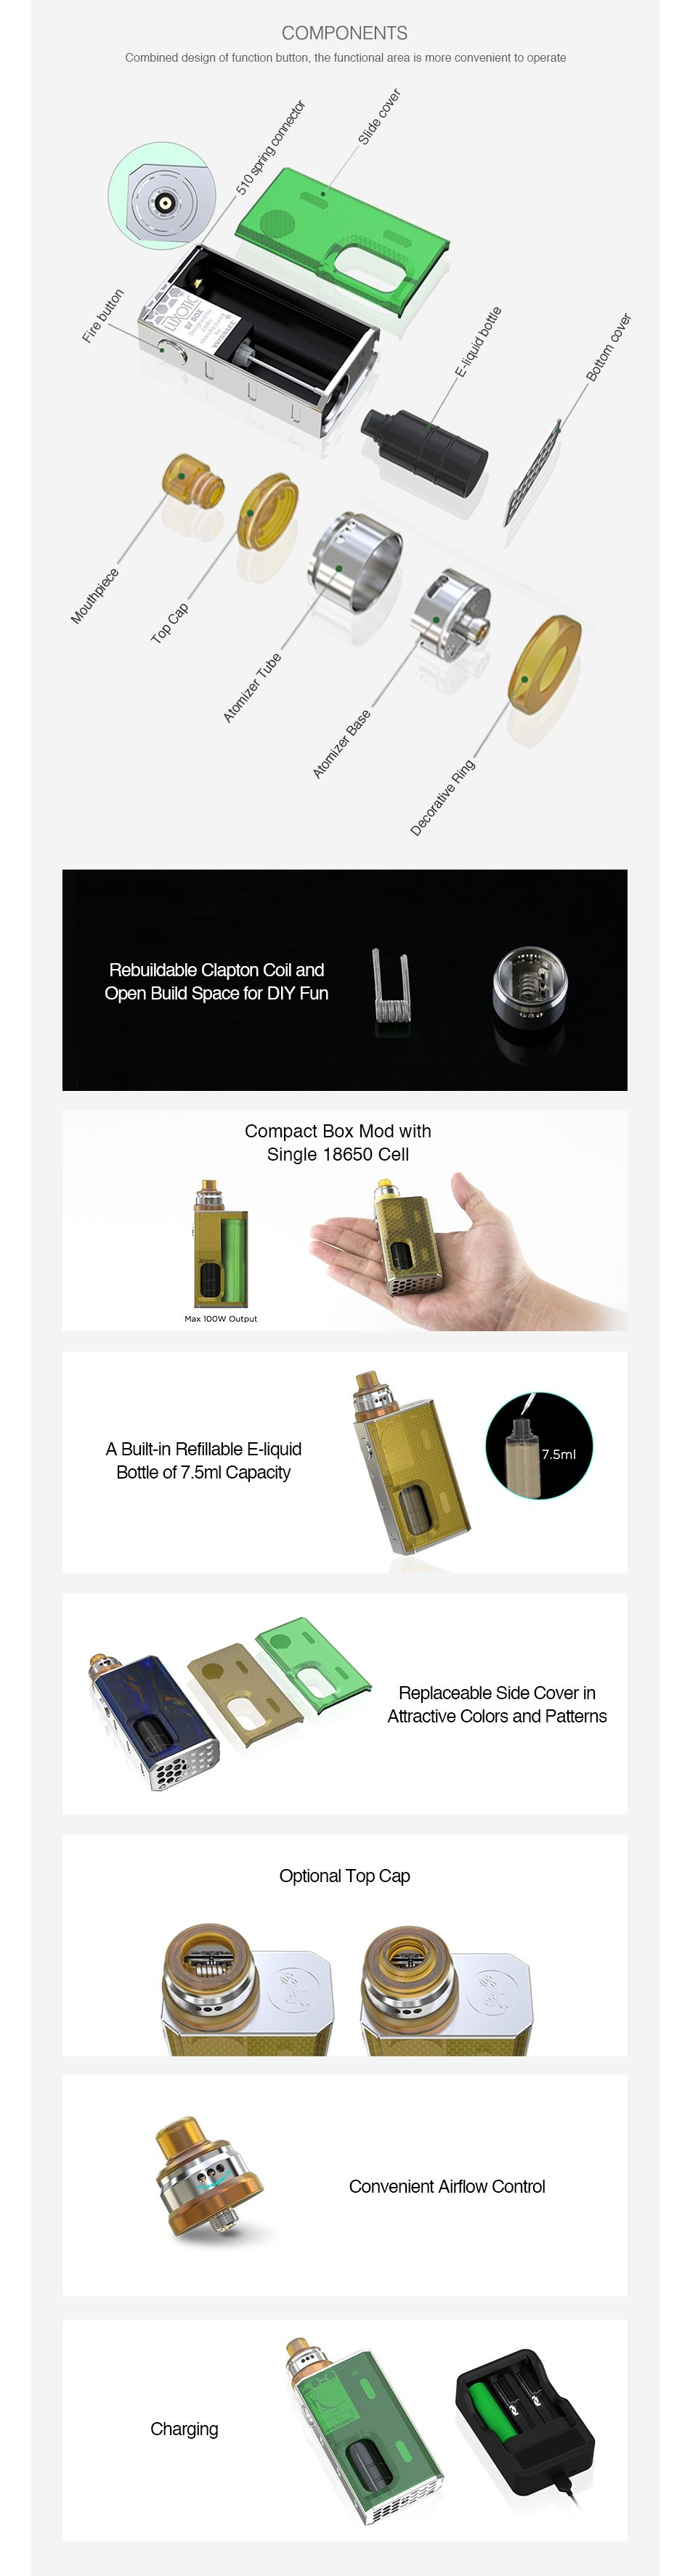 WISMEC Luxotic BF Box Kit with Tobhino COMPONENTS combine cosign of runcton buton  tc functio na arca ls morc convenient to operate   buildable Clapton Coil and Open Build Space for DIY Fun Single 18650 Cel A Built in Refillable E liquid Bottle of 7 5ml Capacity eplaceable side Cover in